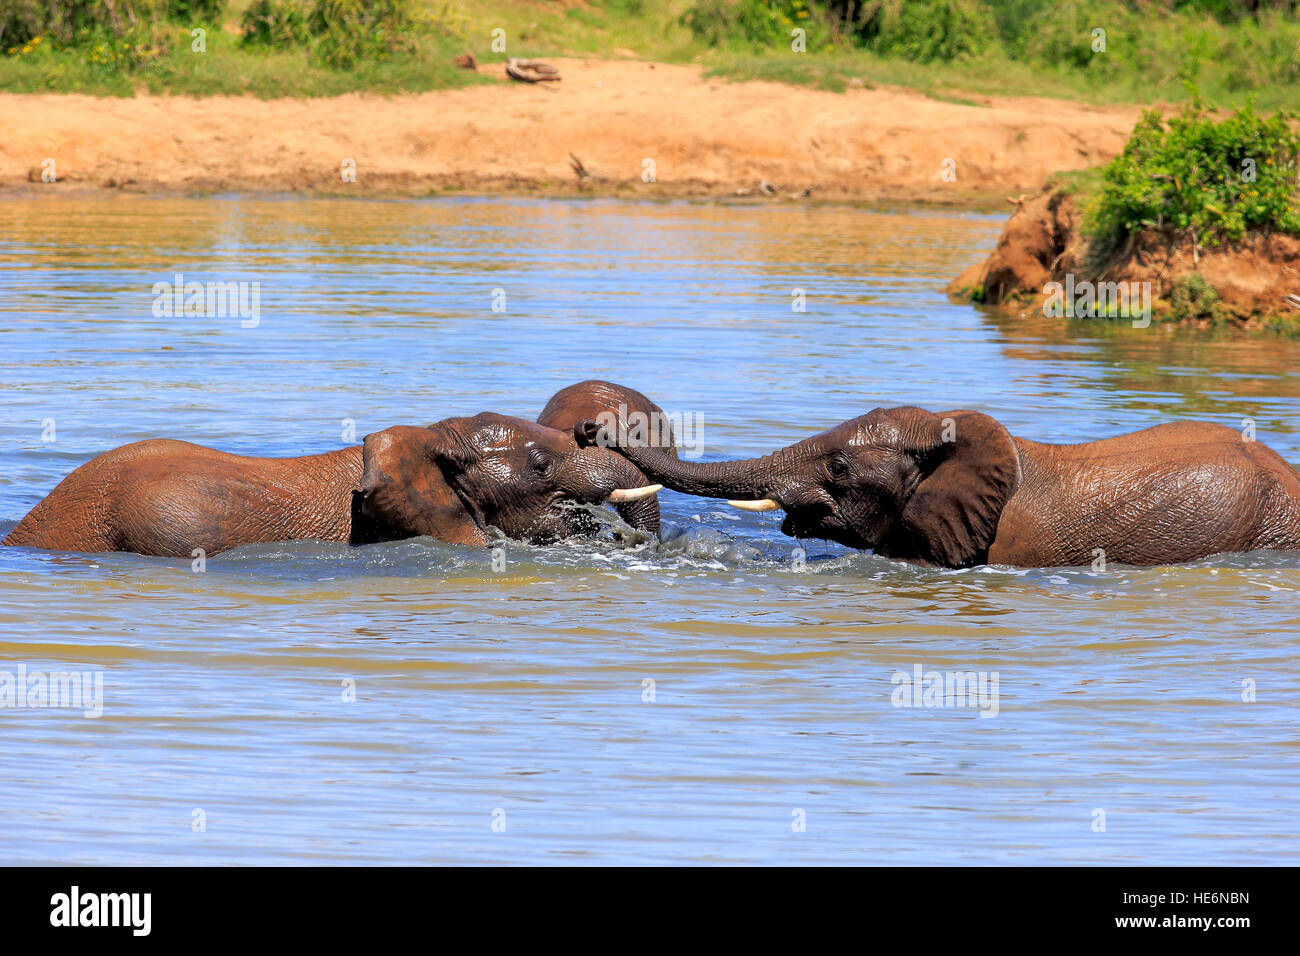 African Elephant, (Loxodonta africana), fighting in water, Addo Elephant Nationalpark, Eastern Cape, South Africa, Africa Stock Photo